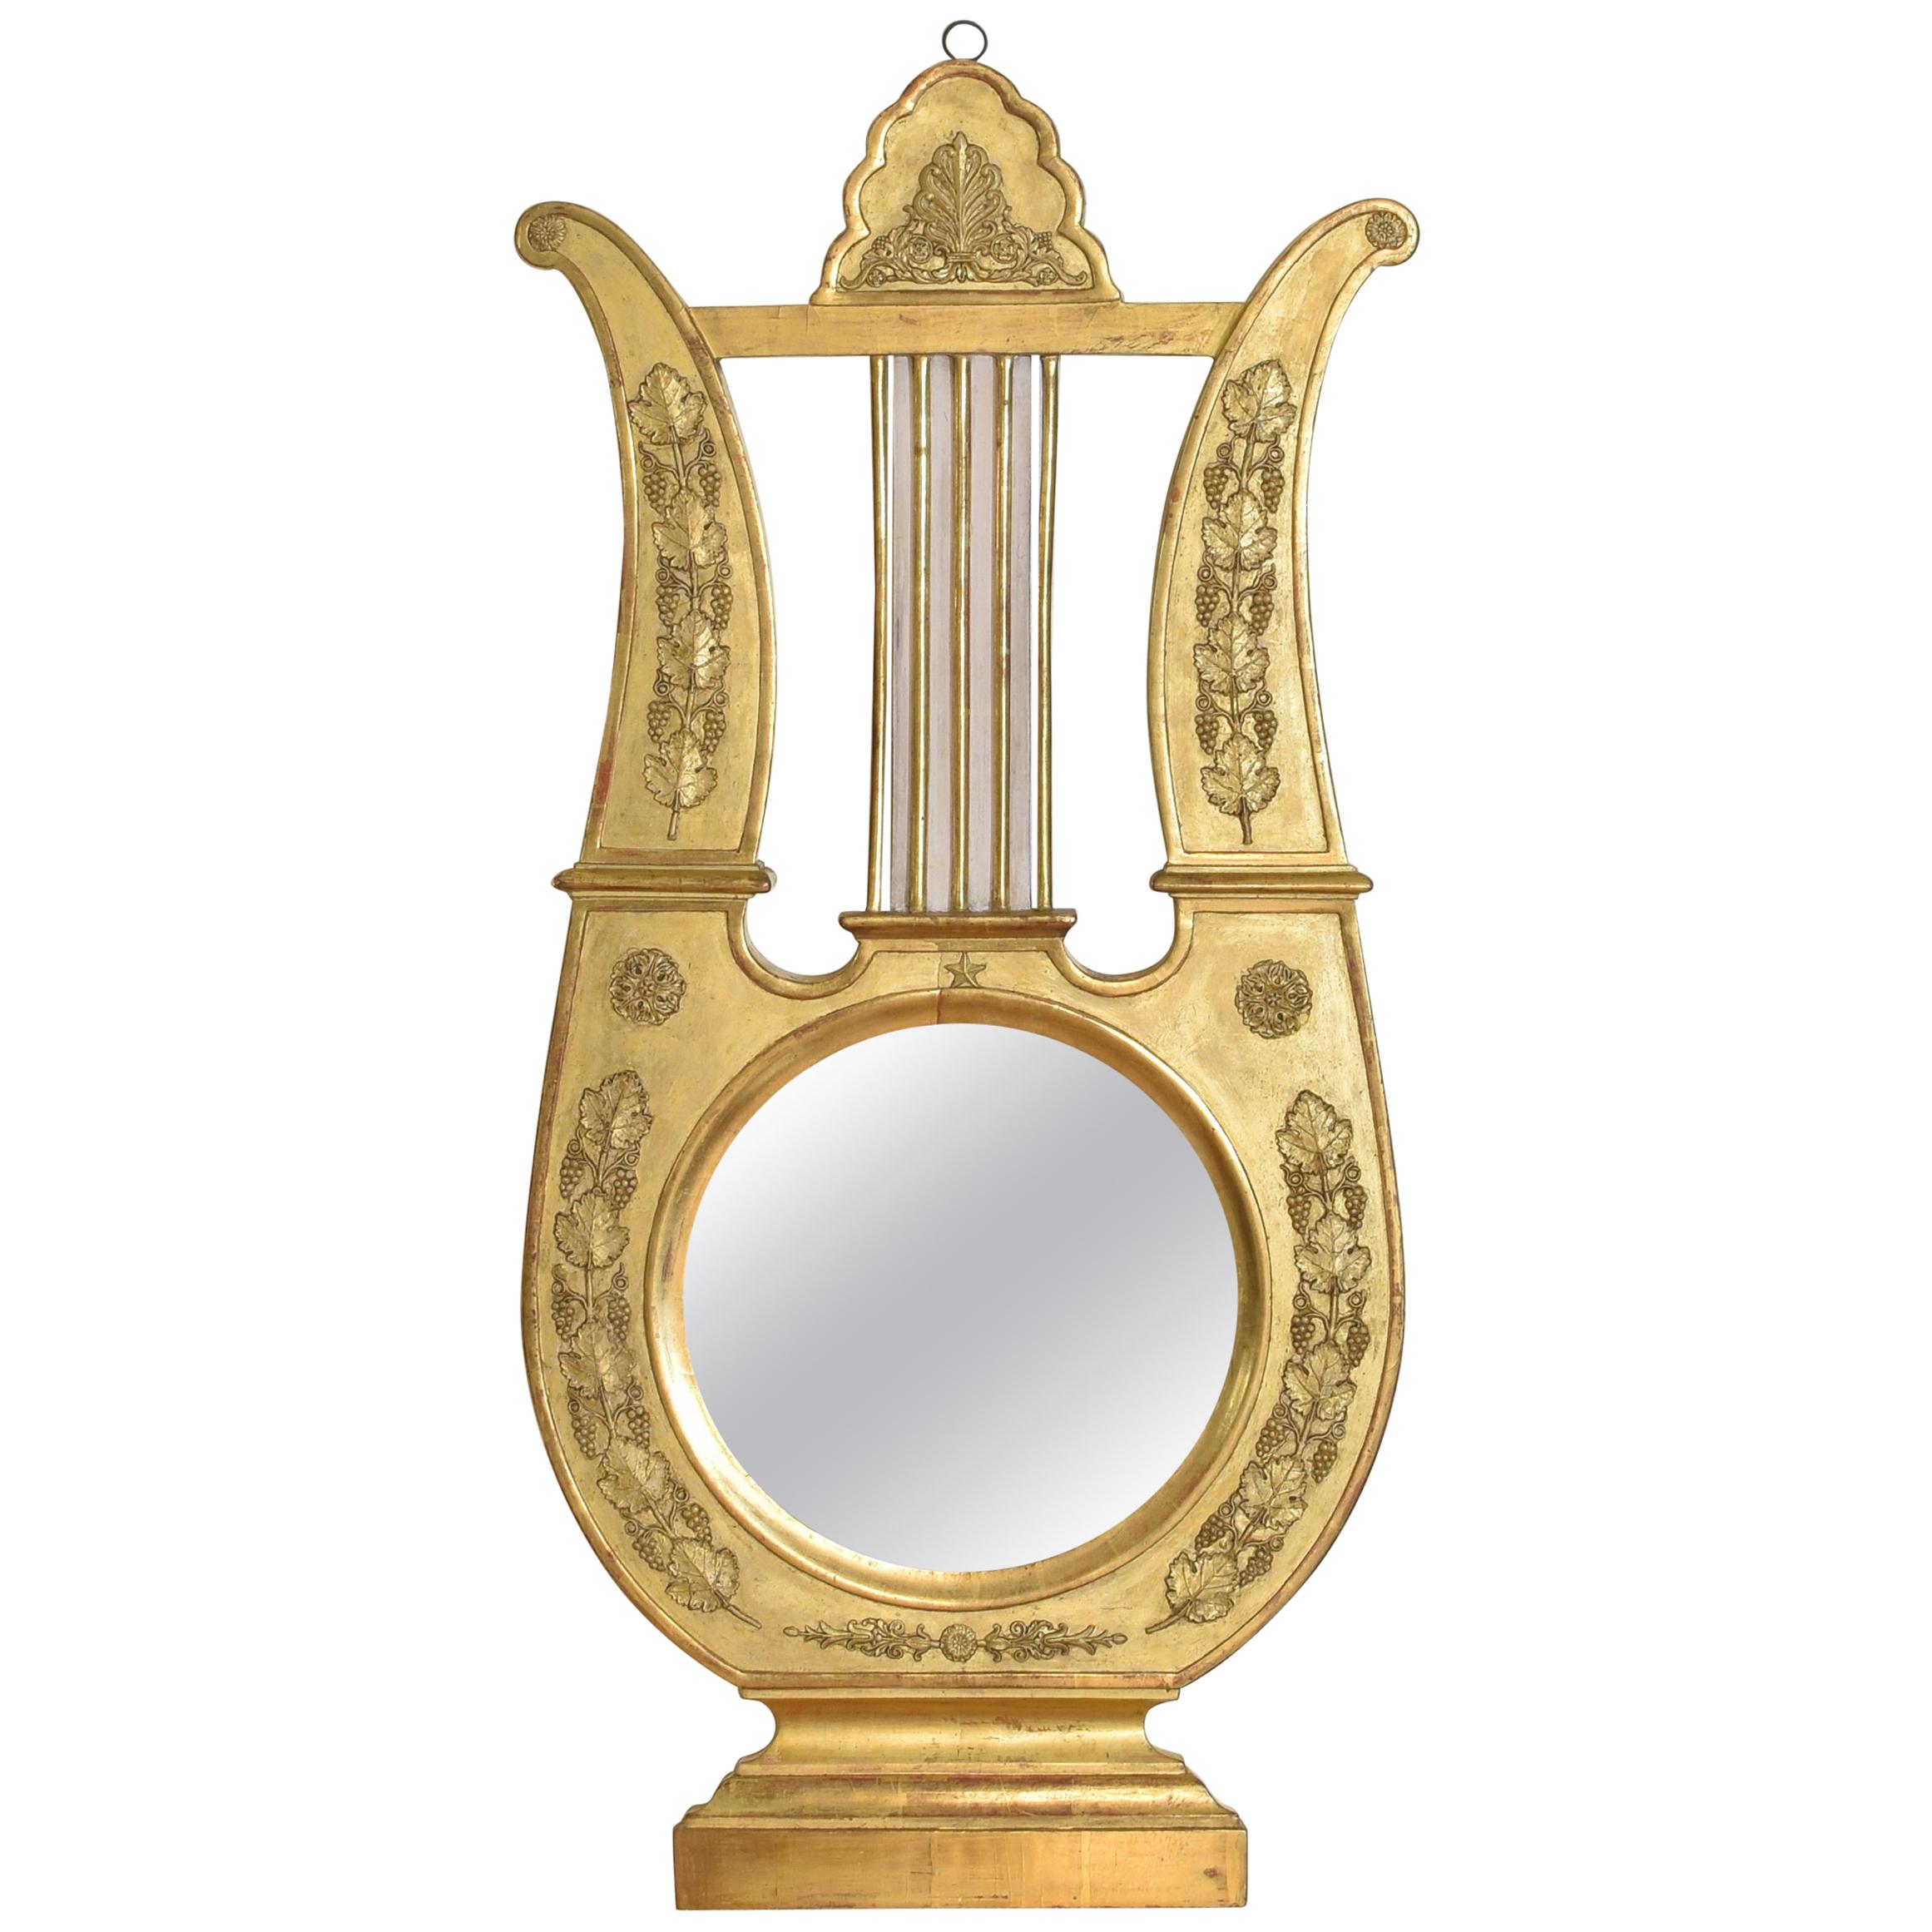 French Empire Period Carved Giltwood Mirror, Formerly a Barometer, 19th Century